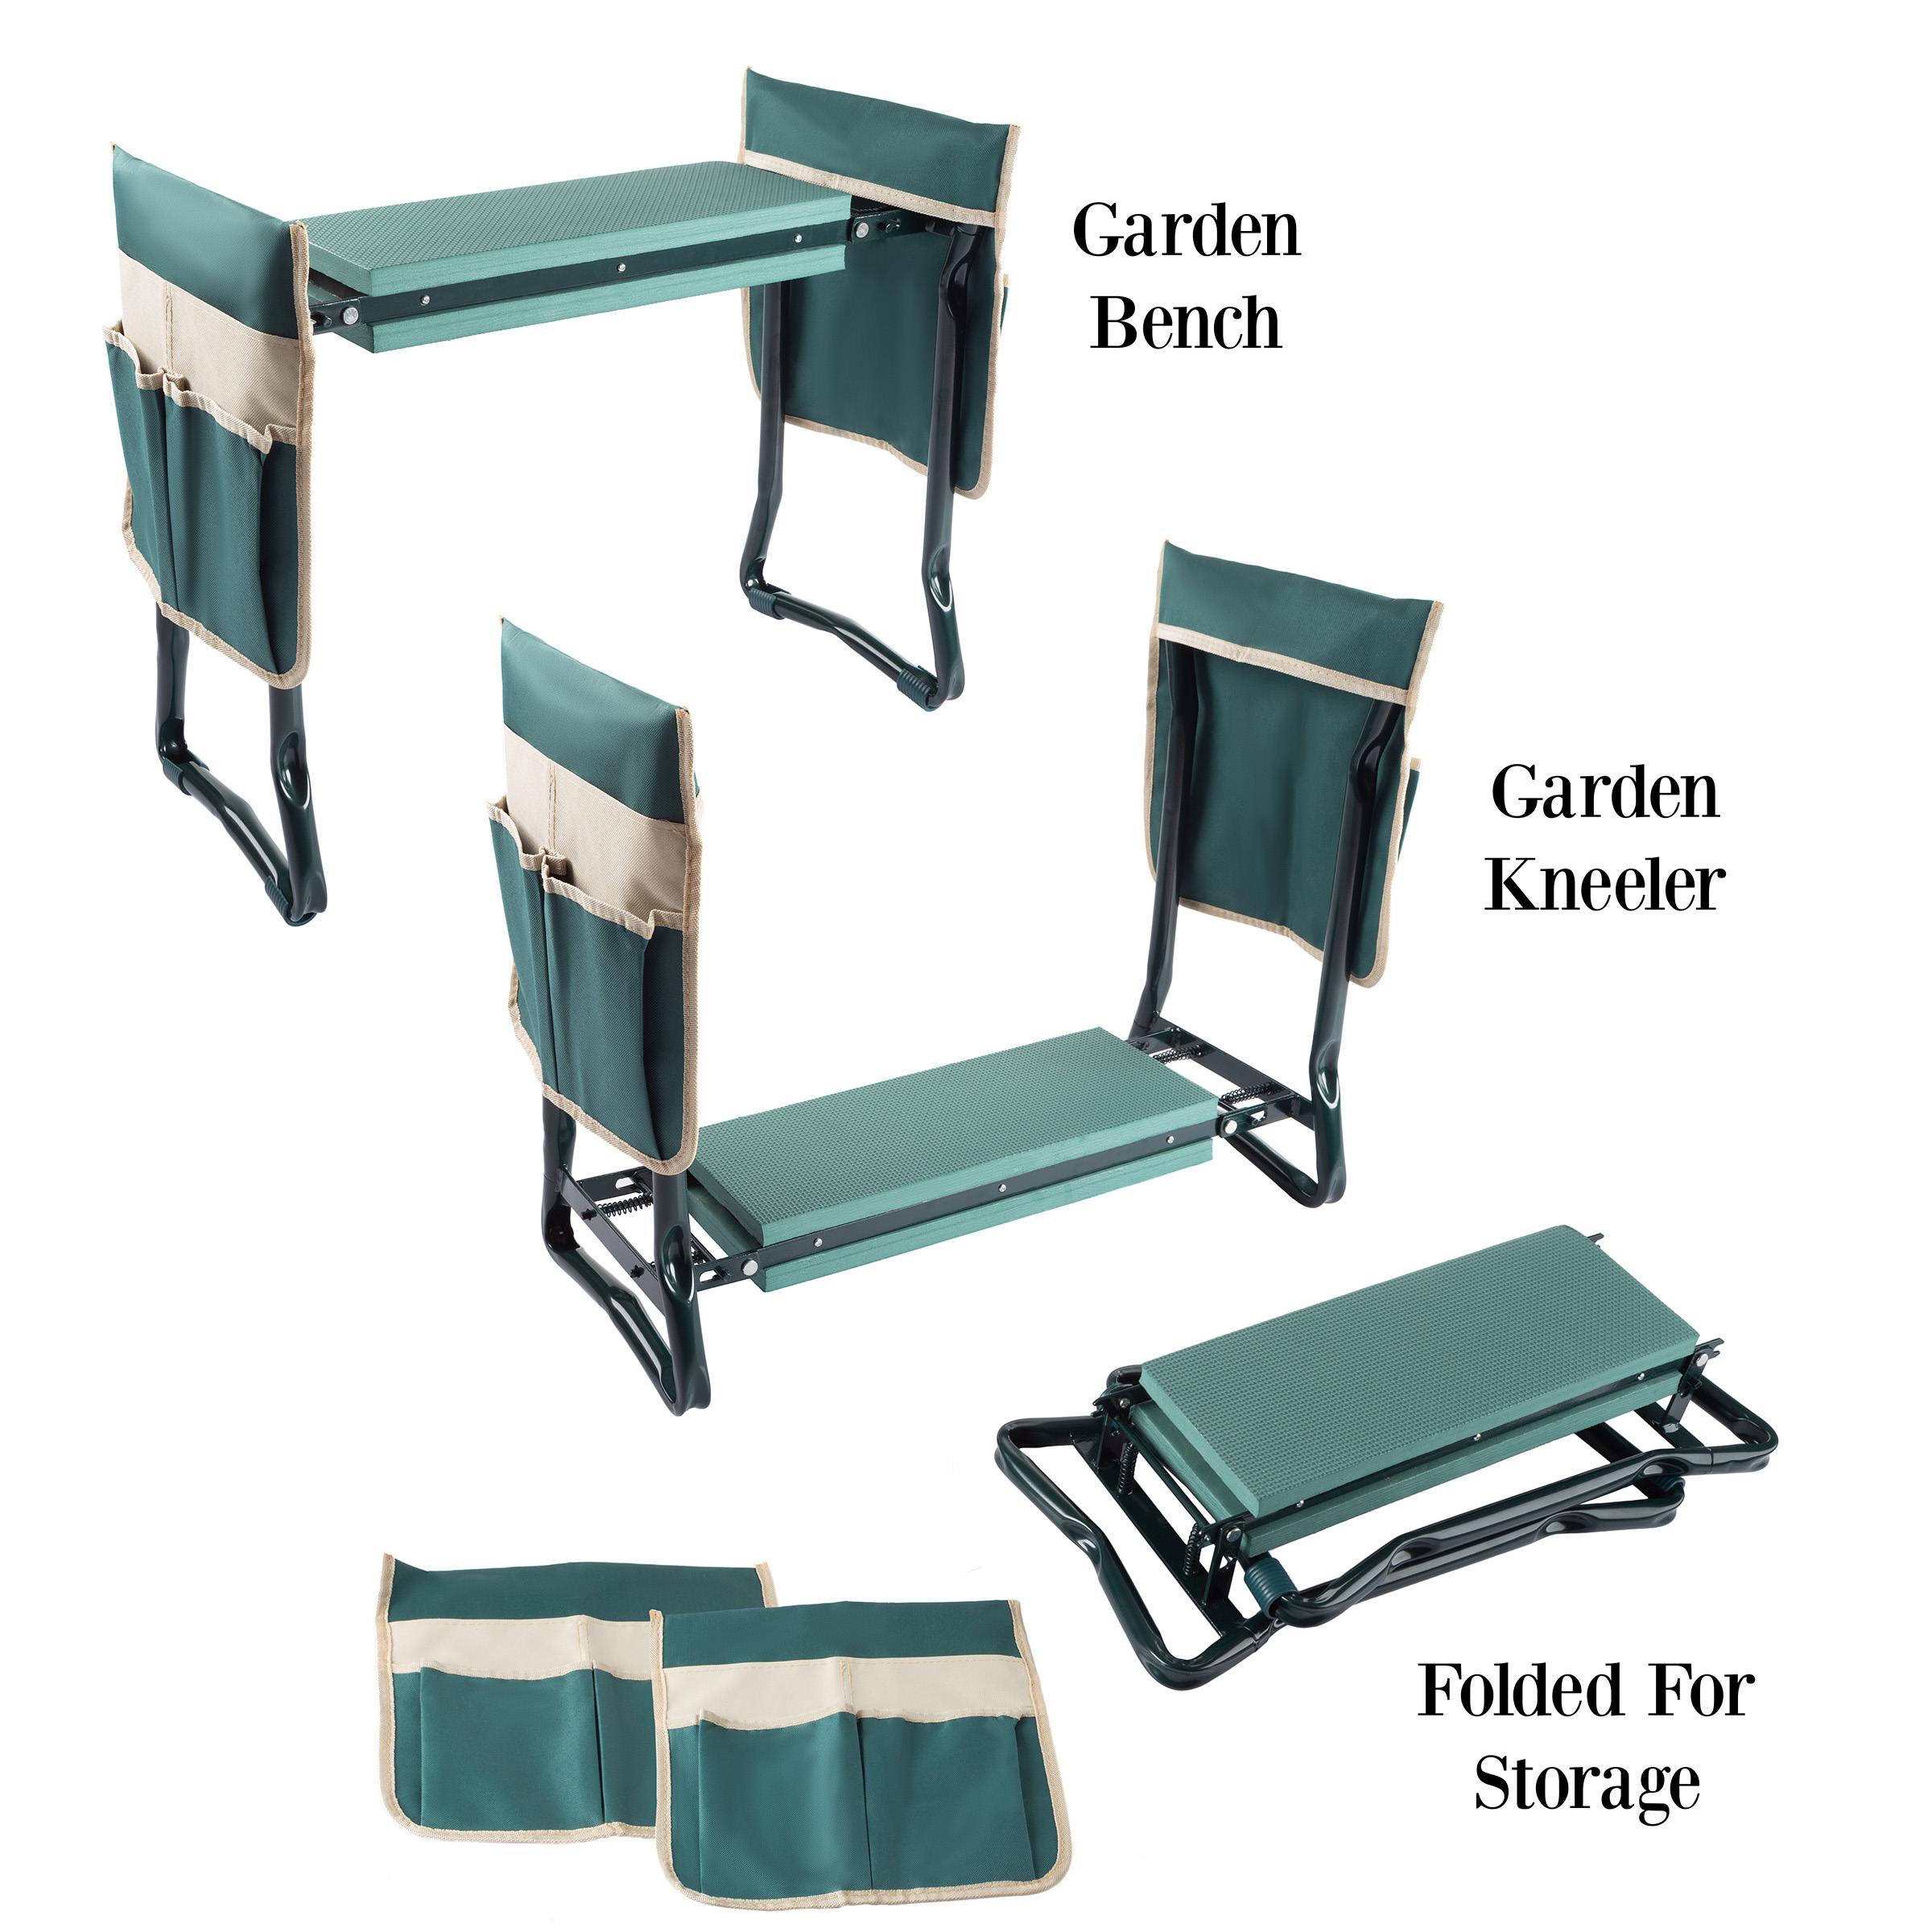 Pure Garden Kneeler Bench - Foldable Stool with 2 Tool Pouches (Green) - image 1 of 7